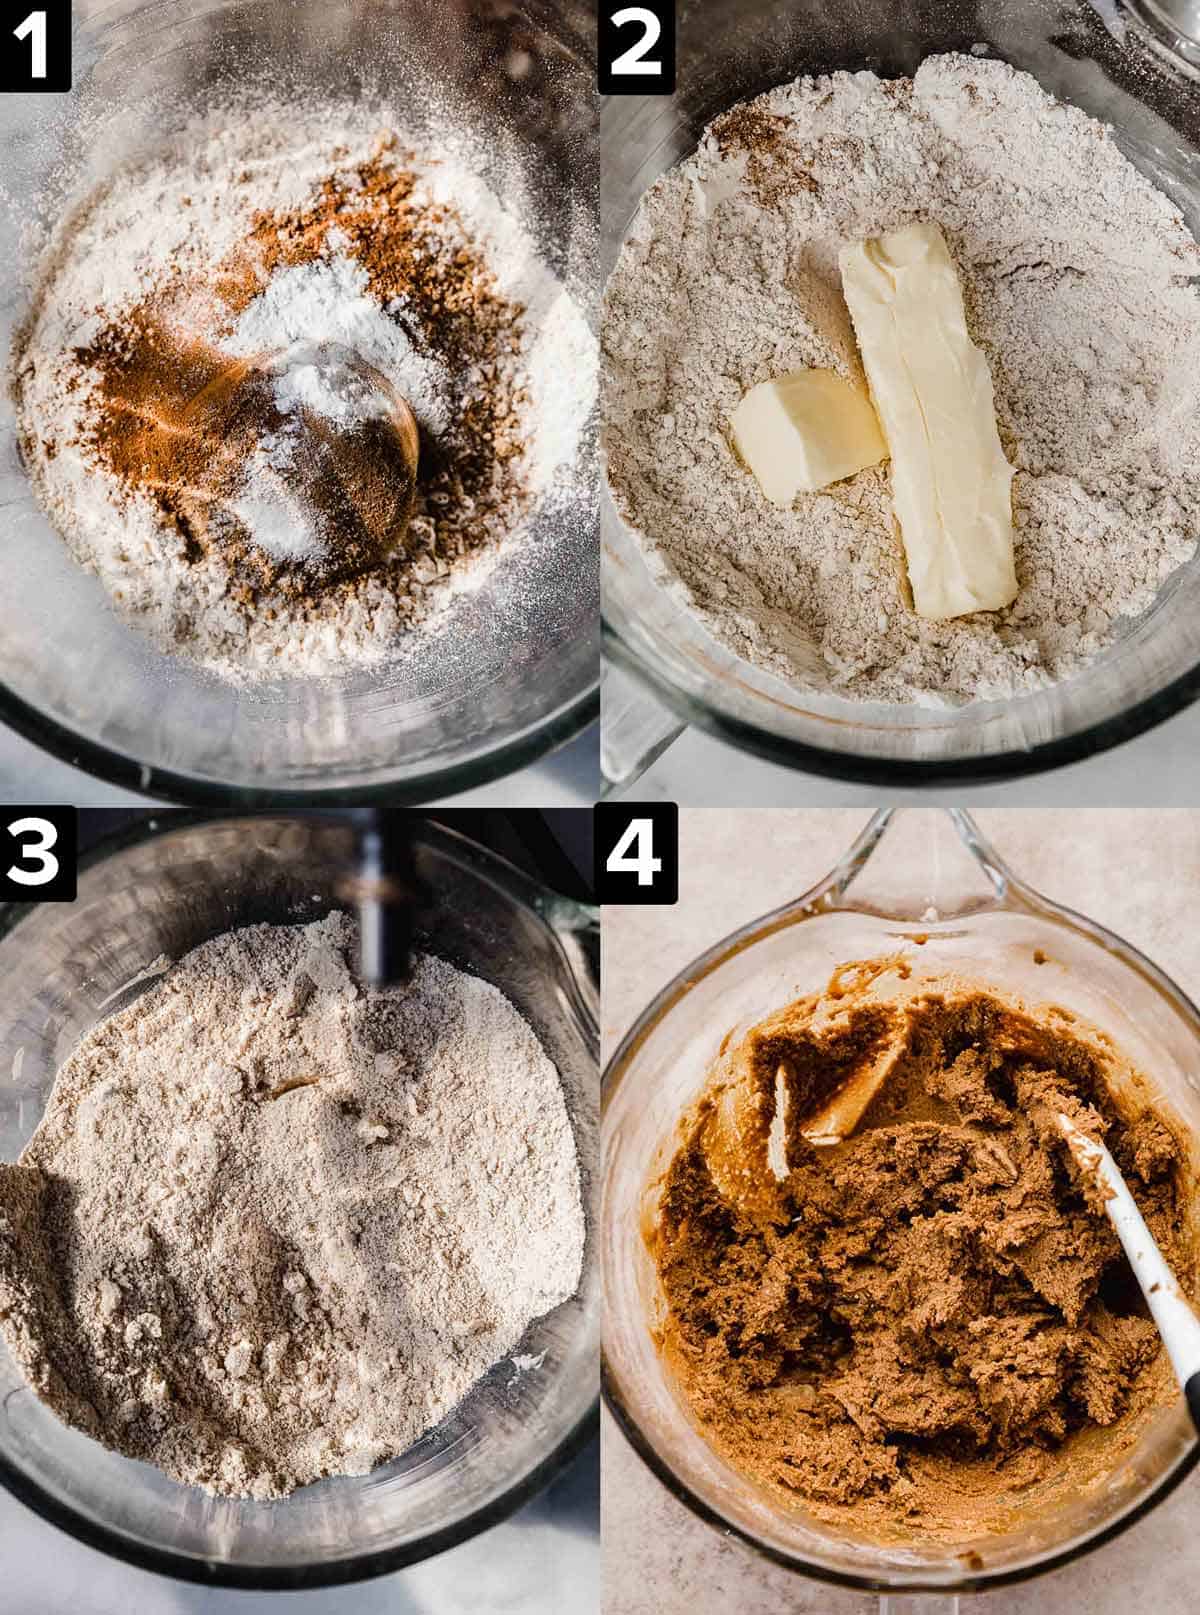 Four photos showing the process of how to make gingerbread man cookie dough.